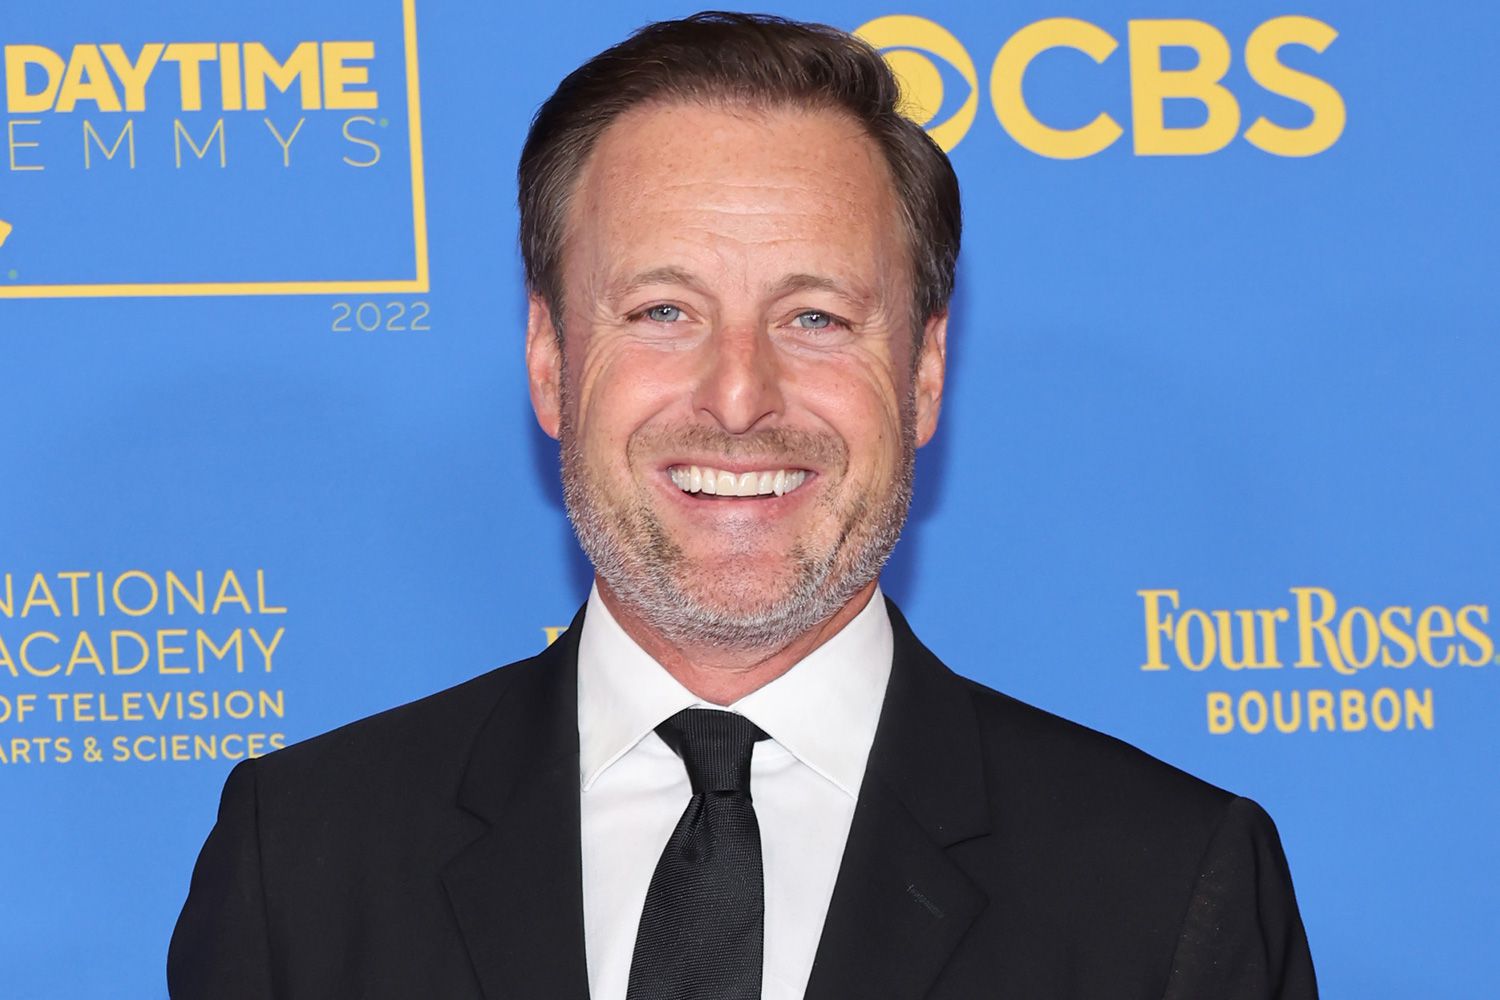 chris-harrison-criticizes-the-bachelor-as-toxic-two-years-after-racism-scandal